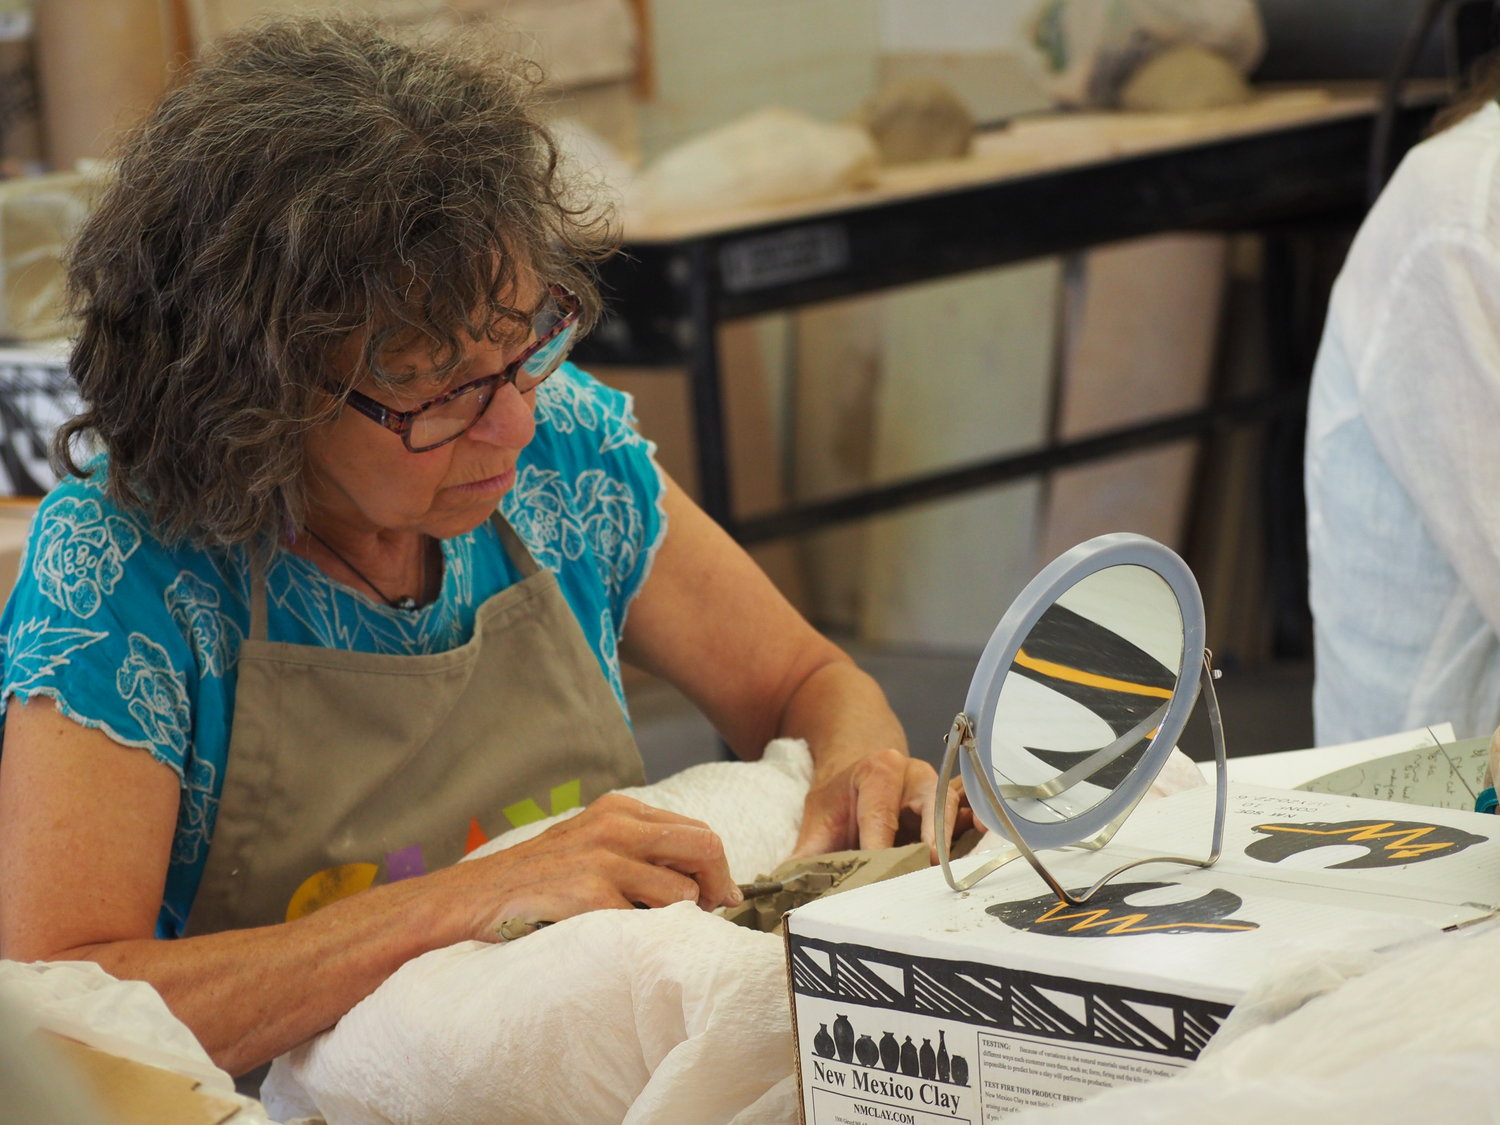 Zoe Wolfe carefully crafts her idea in the clay through the delicate stroke of her skillful hand.